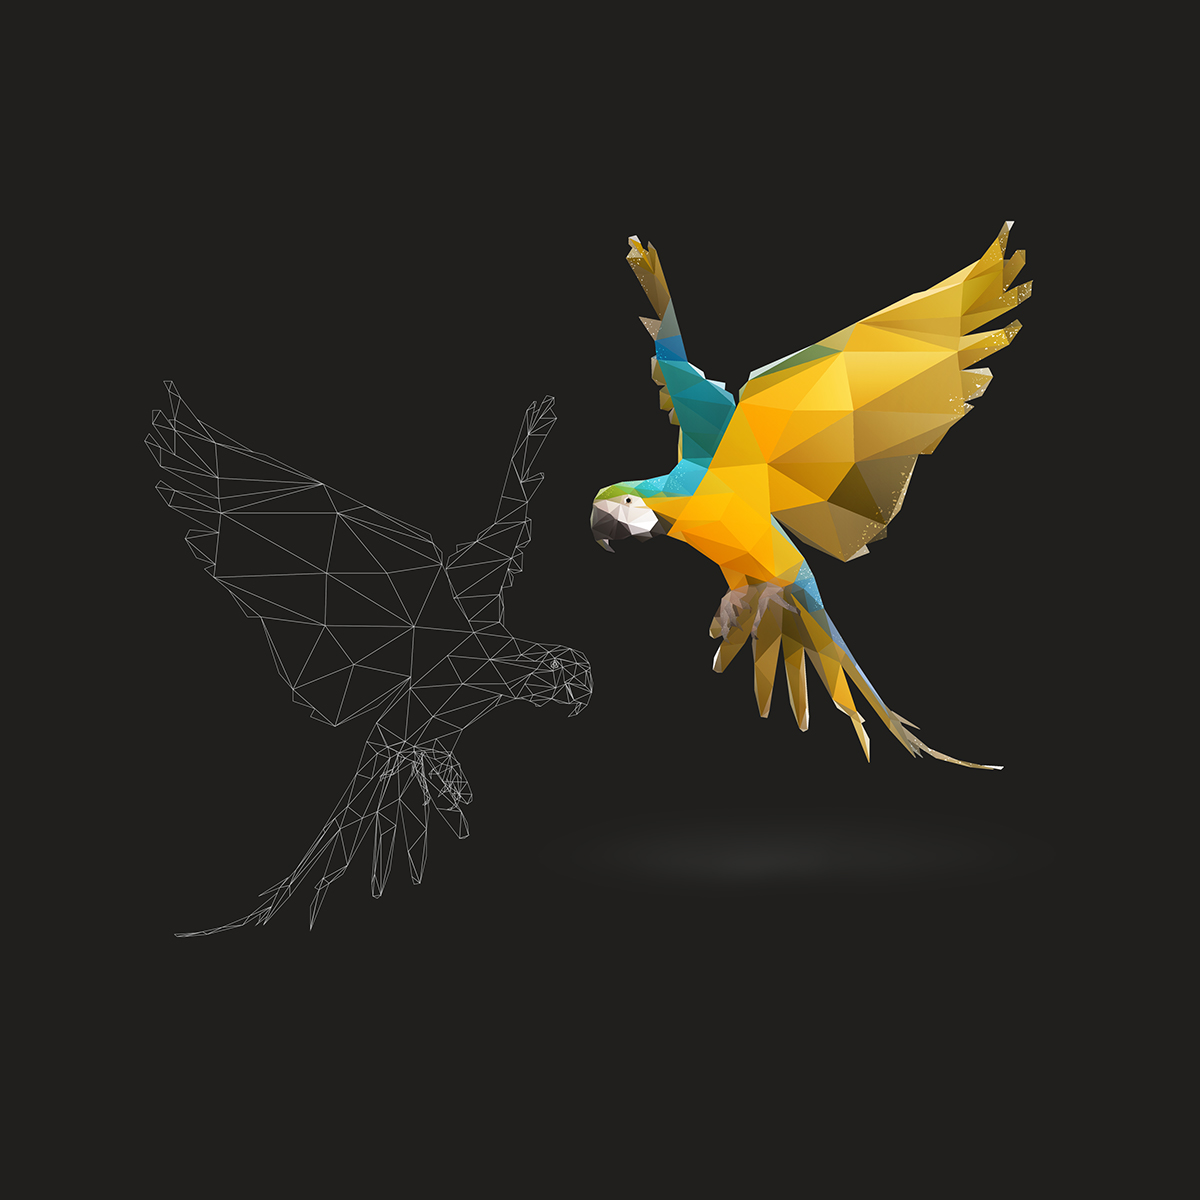 macaw Low Poly low polygon vector art photoshopcc Ps25Under25 photoshop birds animals cute animals